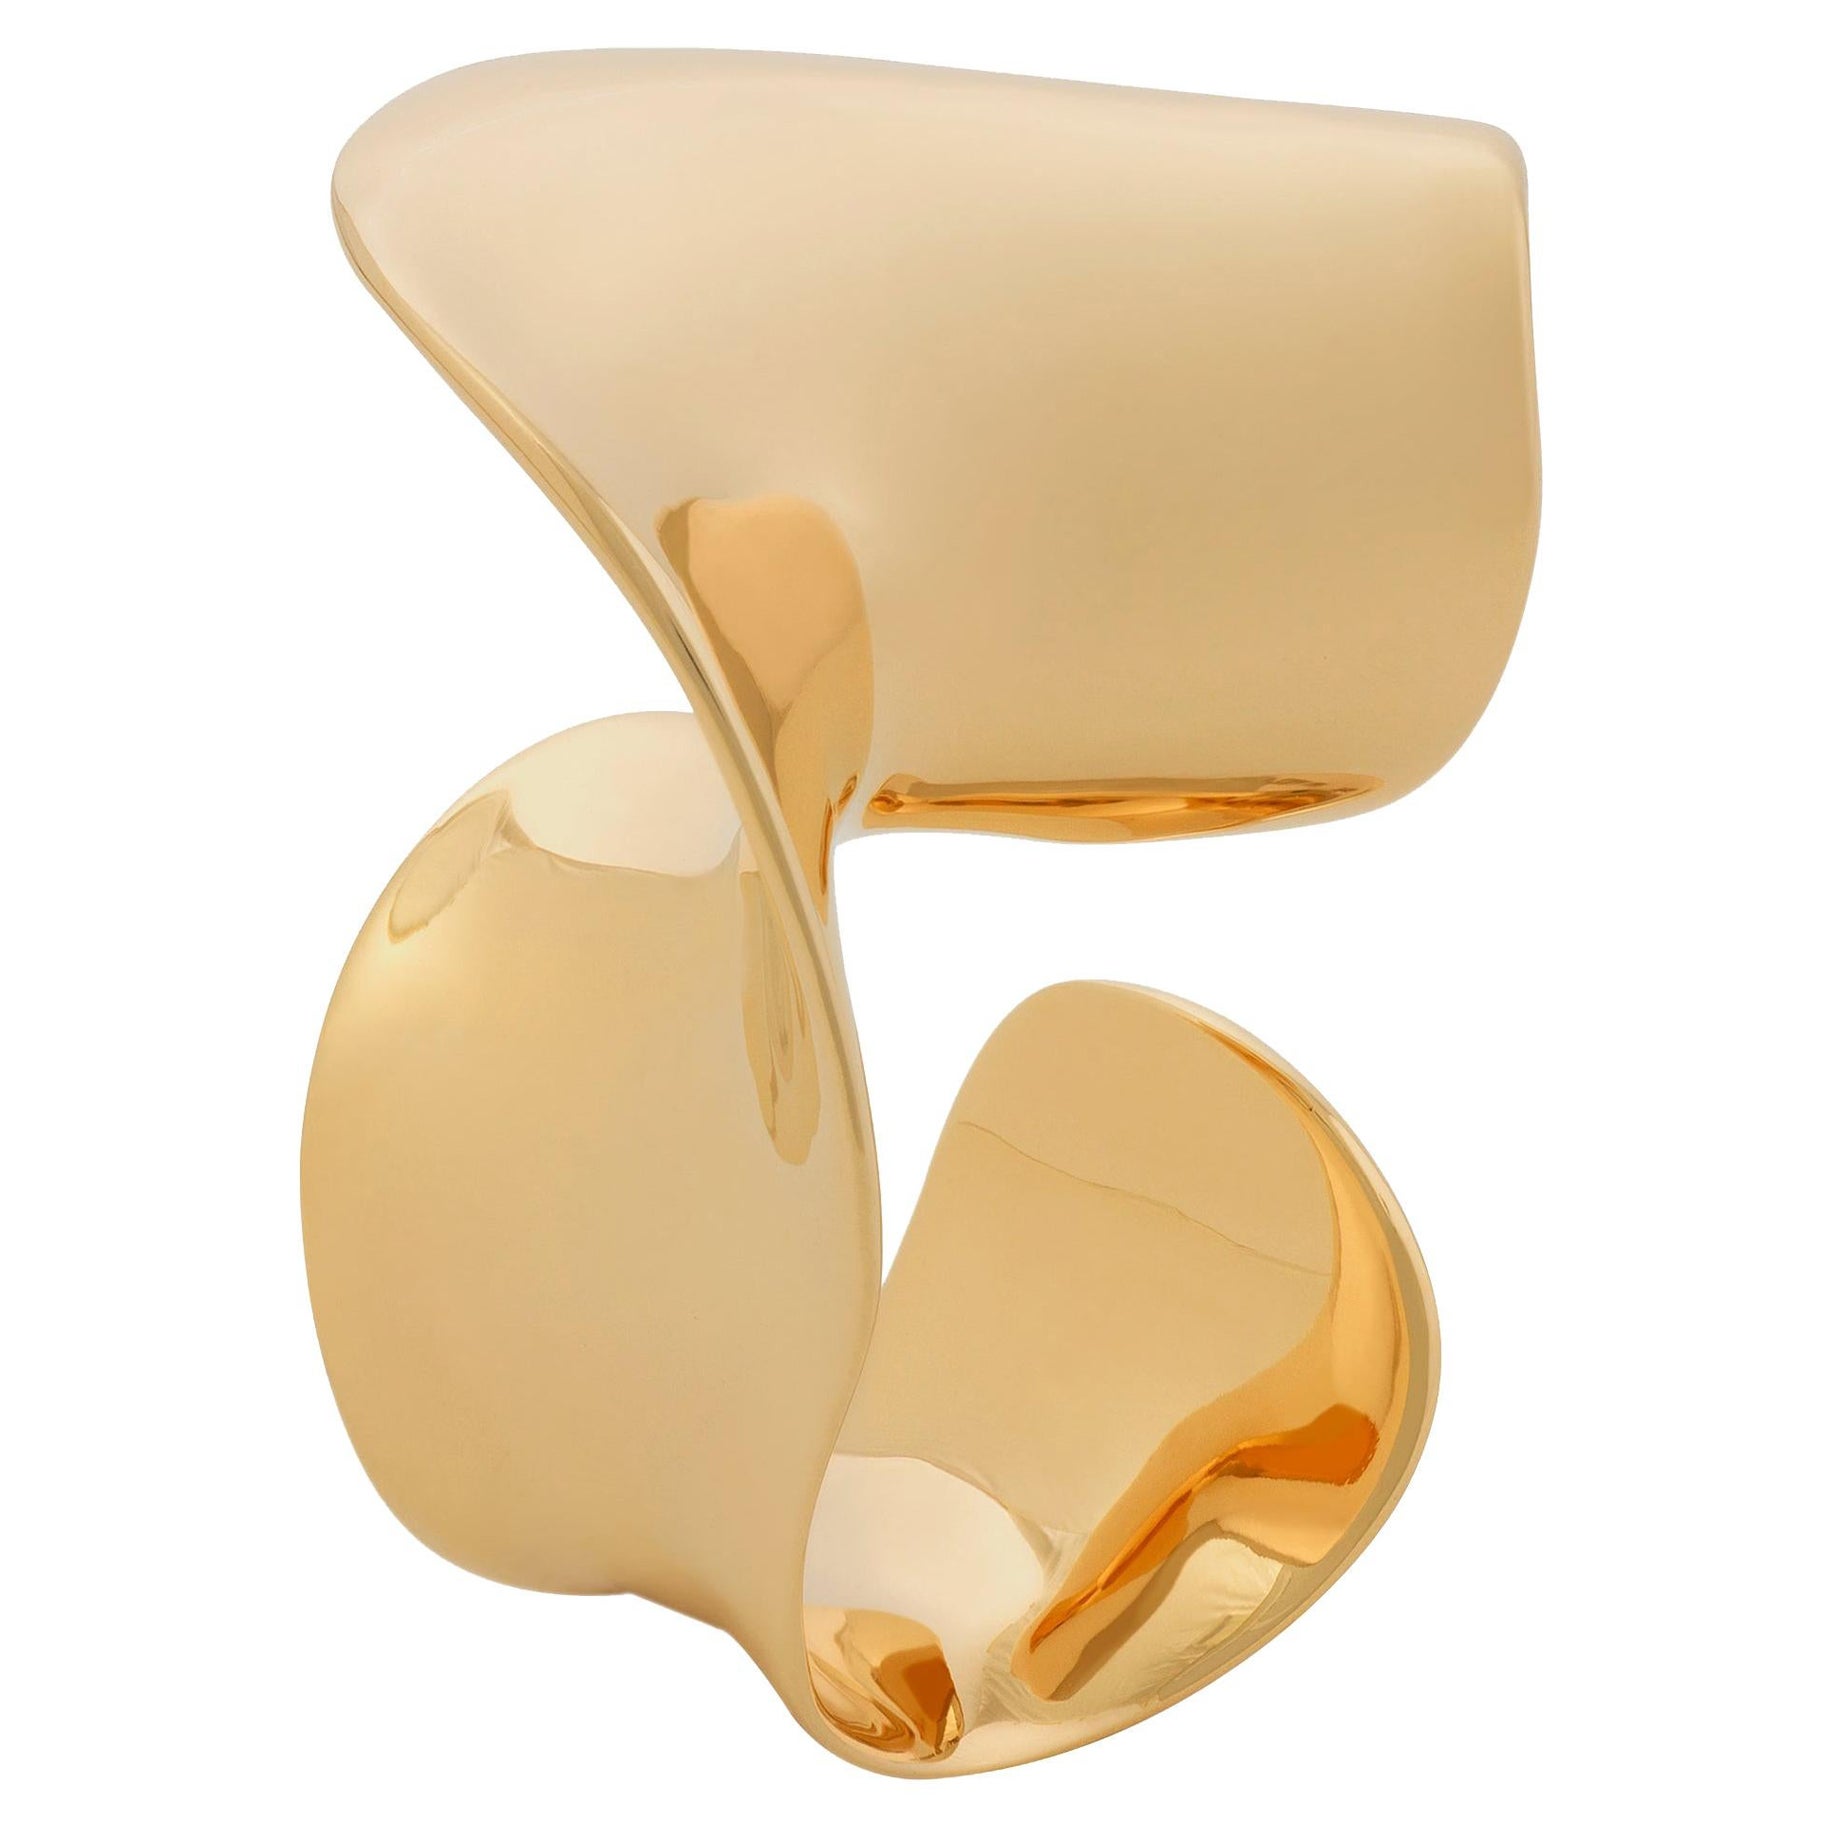 Nathalie Jean Contemporary Limited Edition 18 Karat Gold Sculpture Cocktail Ring